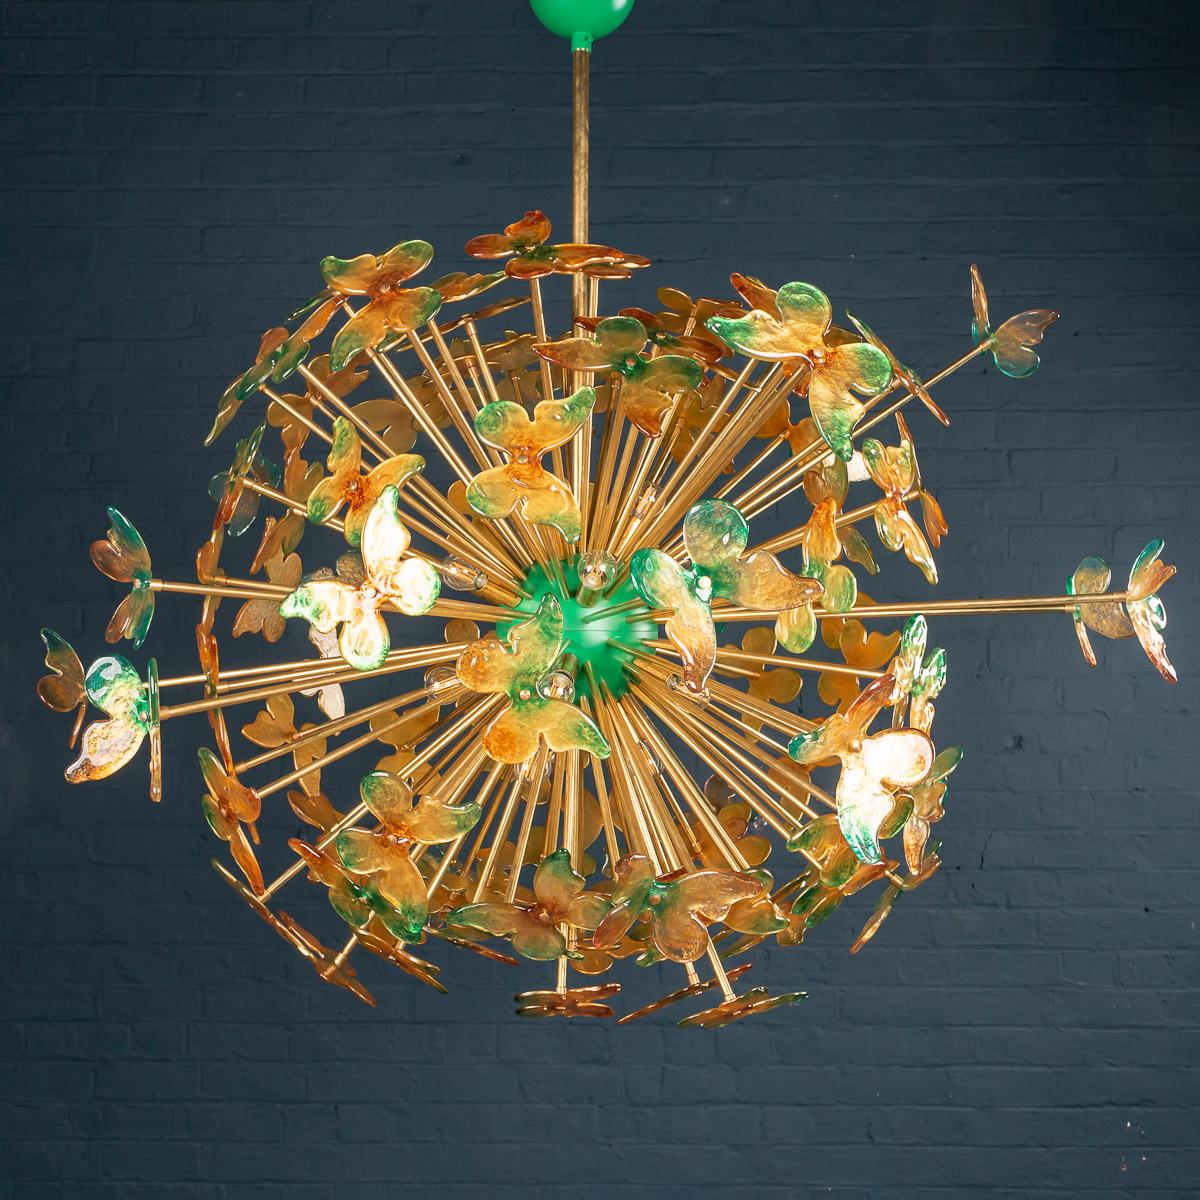 Very large Venetian handmade chandelier, inspired by 1950s “Sputnik” models, made with glass green and gold butterflies exploding from the centre. A truly spectacular piece of interior design, made in a very limited number in Venice,